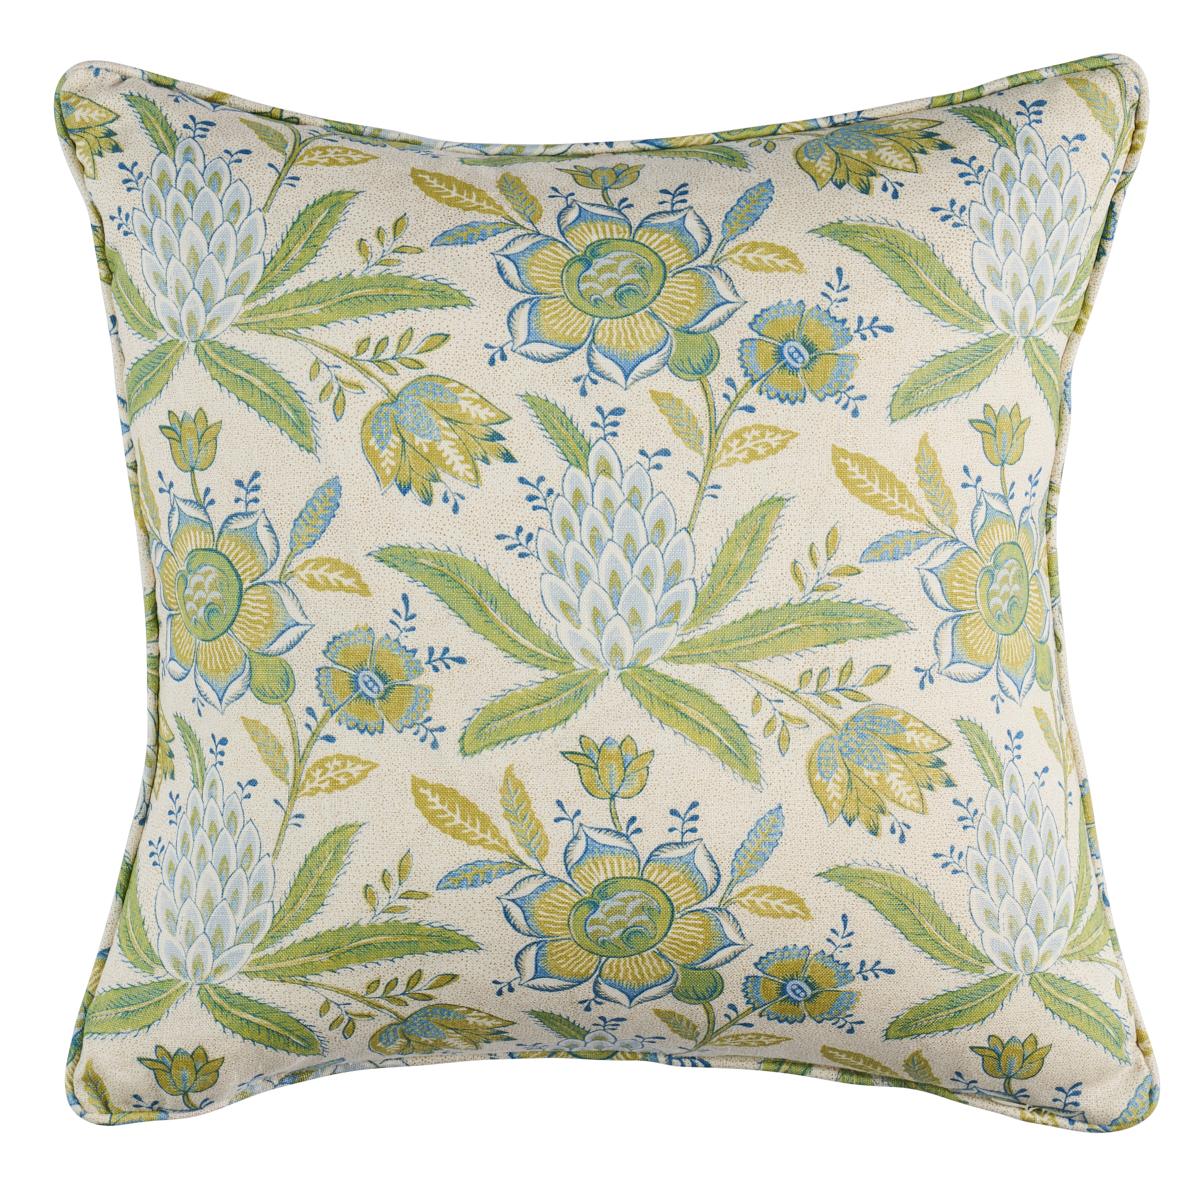 This pillow features Lafayette Botanical with a self welt finish. Inspired by a turn-of-the-18th-century French chintz, Lafayette Botanical in moss features an exuberant flower and pineapple print reflecting the European and American affinity for